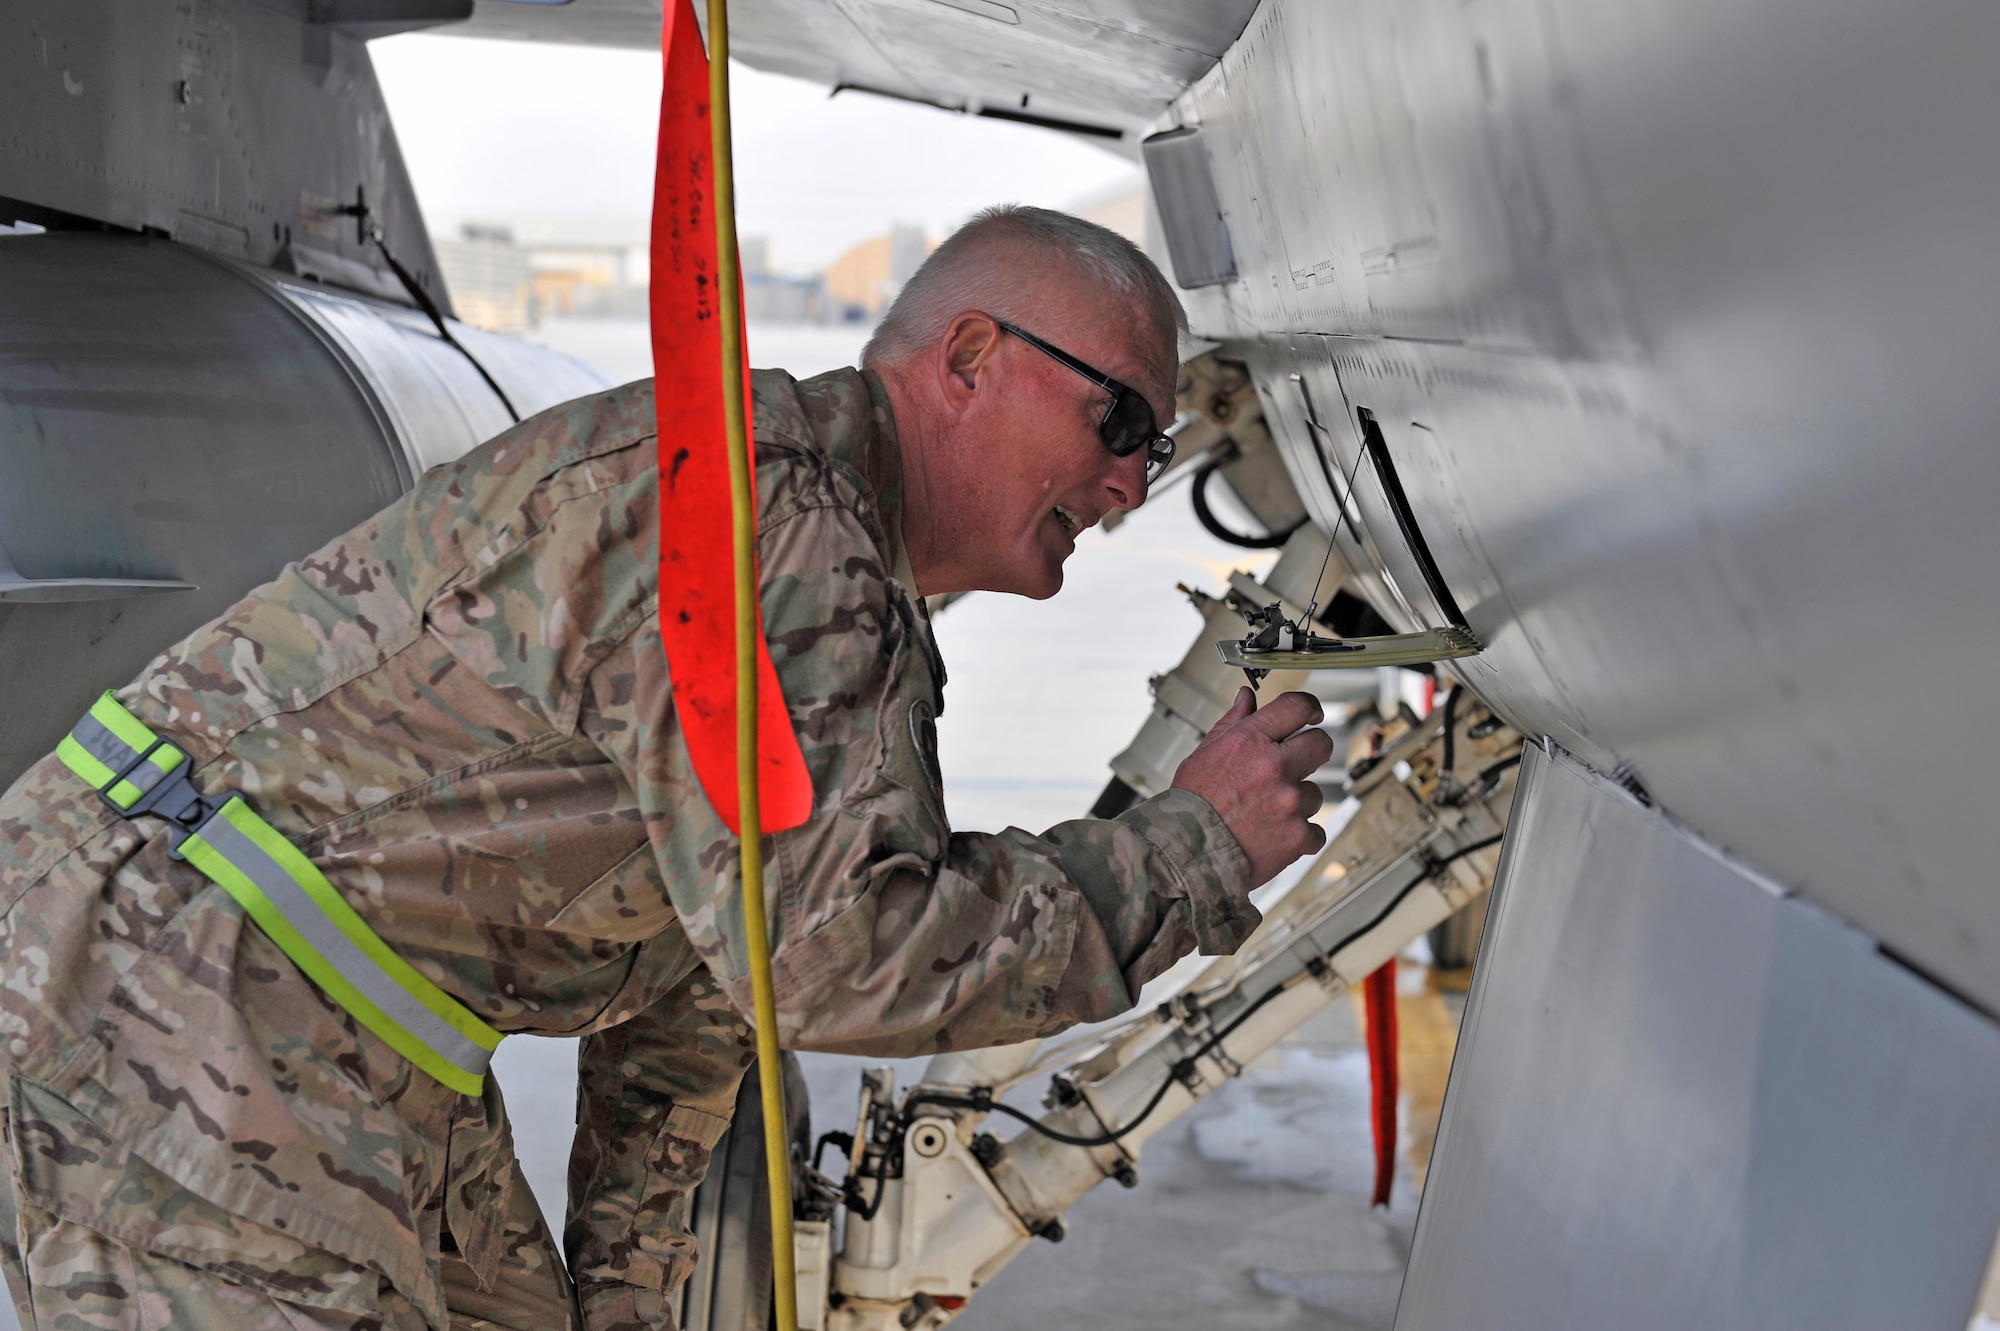 U.S. Air Force Senior Master Sgt. Paul Jordan checks inside a panel while performing an inspection on an F-16 at Bagram Airfield, Afghanistan, Jan. 20, 2014. Jordan is deployed out of Carswell Joint Reserve Base in Fort Worth, Texas to Bagram, and will be retiring this year after 42 years of military service. (U.S. Air Force photo by Senior Master Sgt. Gary J. Rihn/Released)